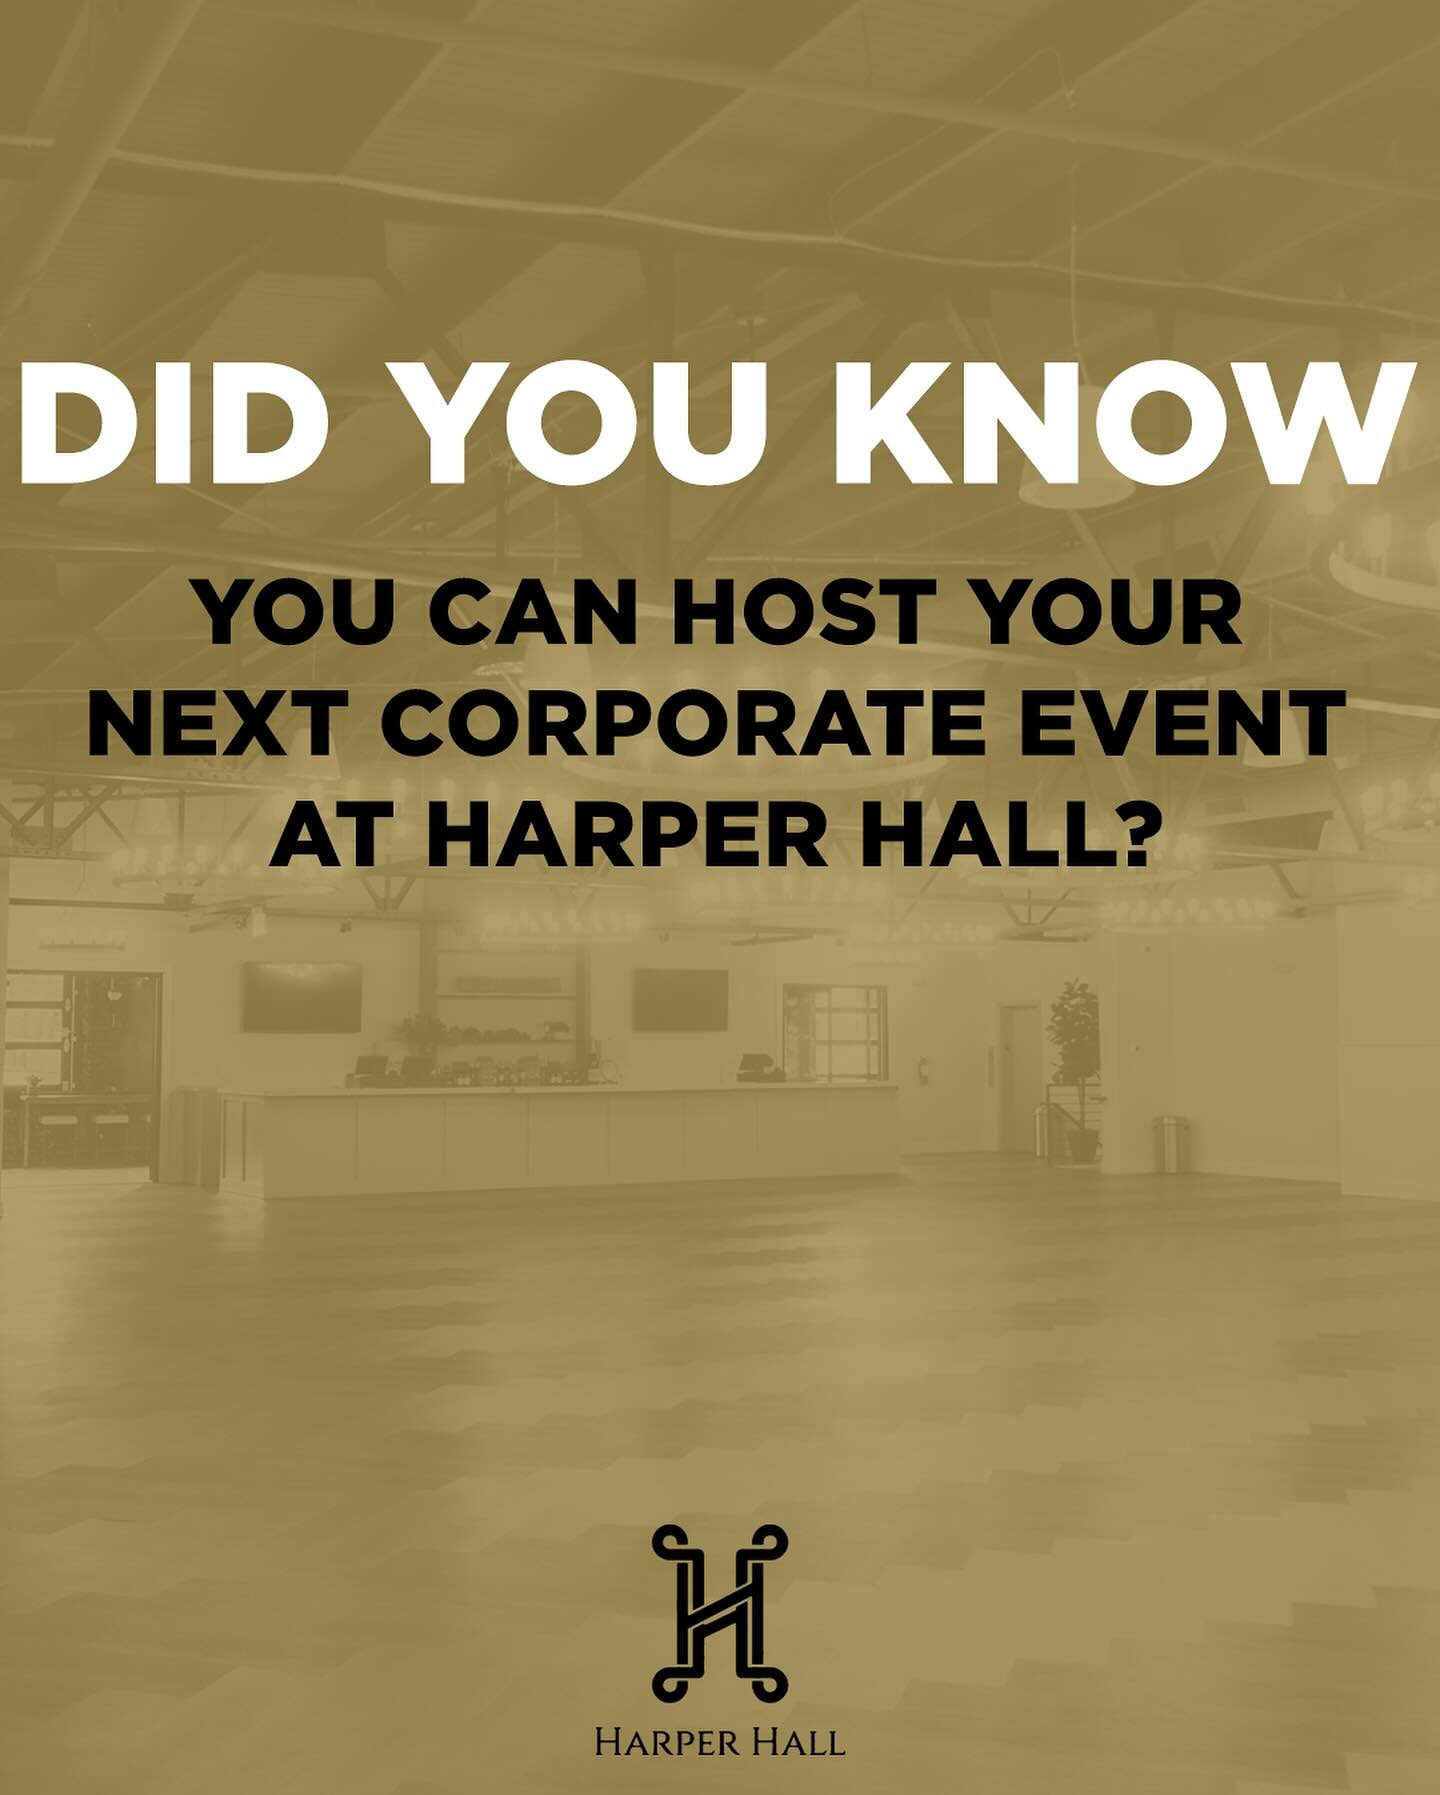 Did you know you can host your next corporate event in the heart of downtown Lexington 🥳

Message us for more details!

#eventspace #downtownlexington #sharethelex #corporateevents #workevent